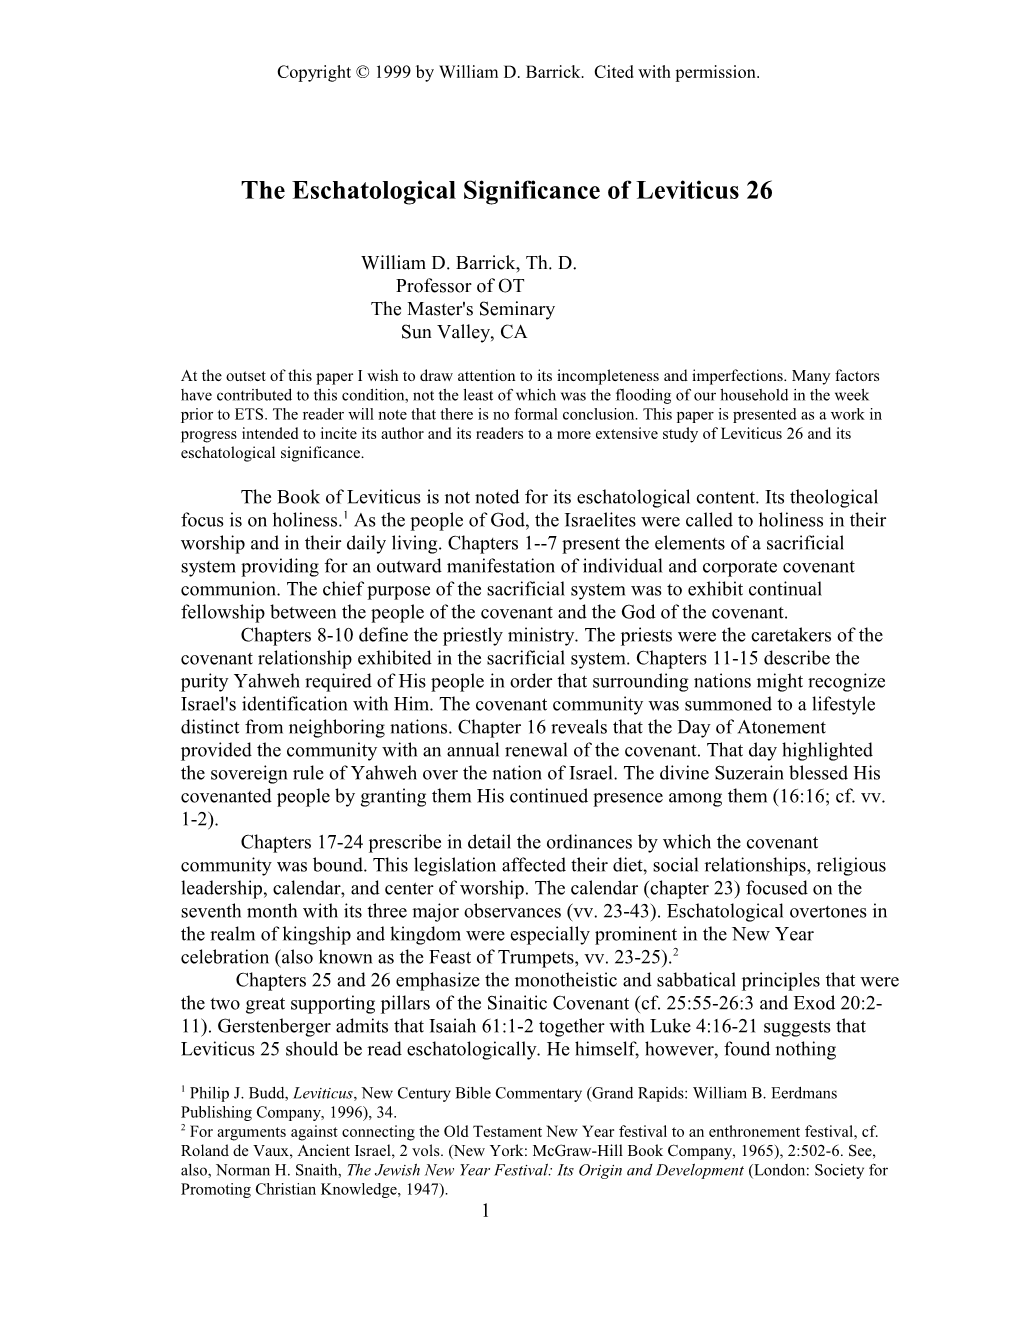 The Eschatological Significance Of Leviticus 26